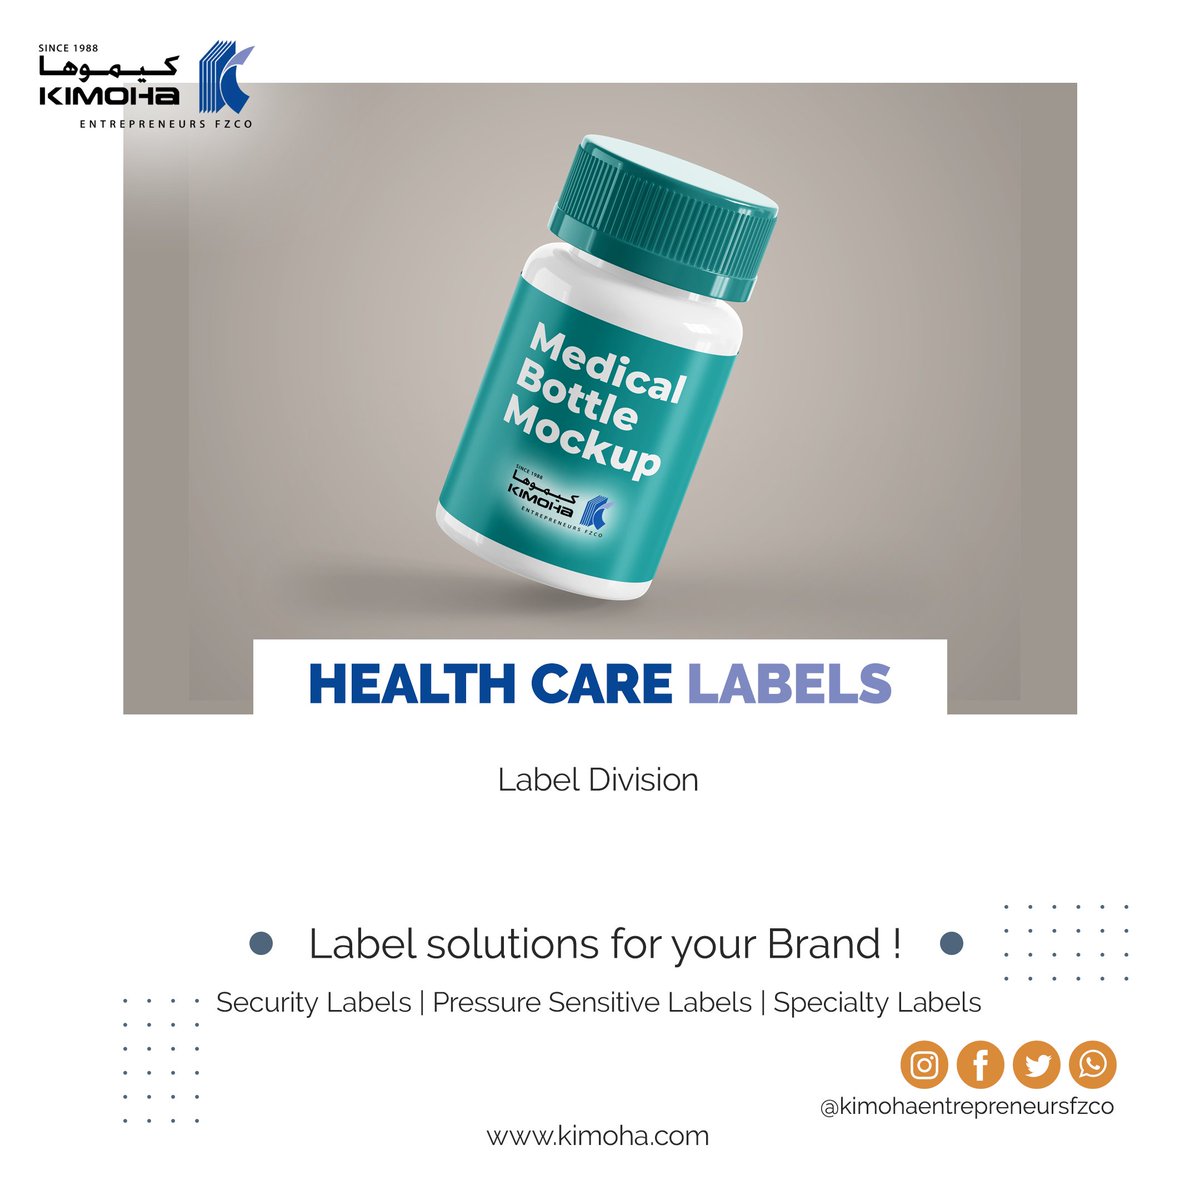 Health Care Labels
kimoha.com
#printingservices #printing #printingsolutions #packagingsolutions #packaging #packagingindustry #wrapping #barcodelabels #barcodescanners  #labelprinting #healthcare #pharmaceuticals #healthcareindustry